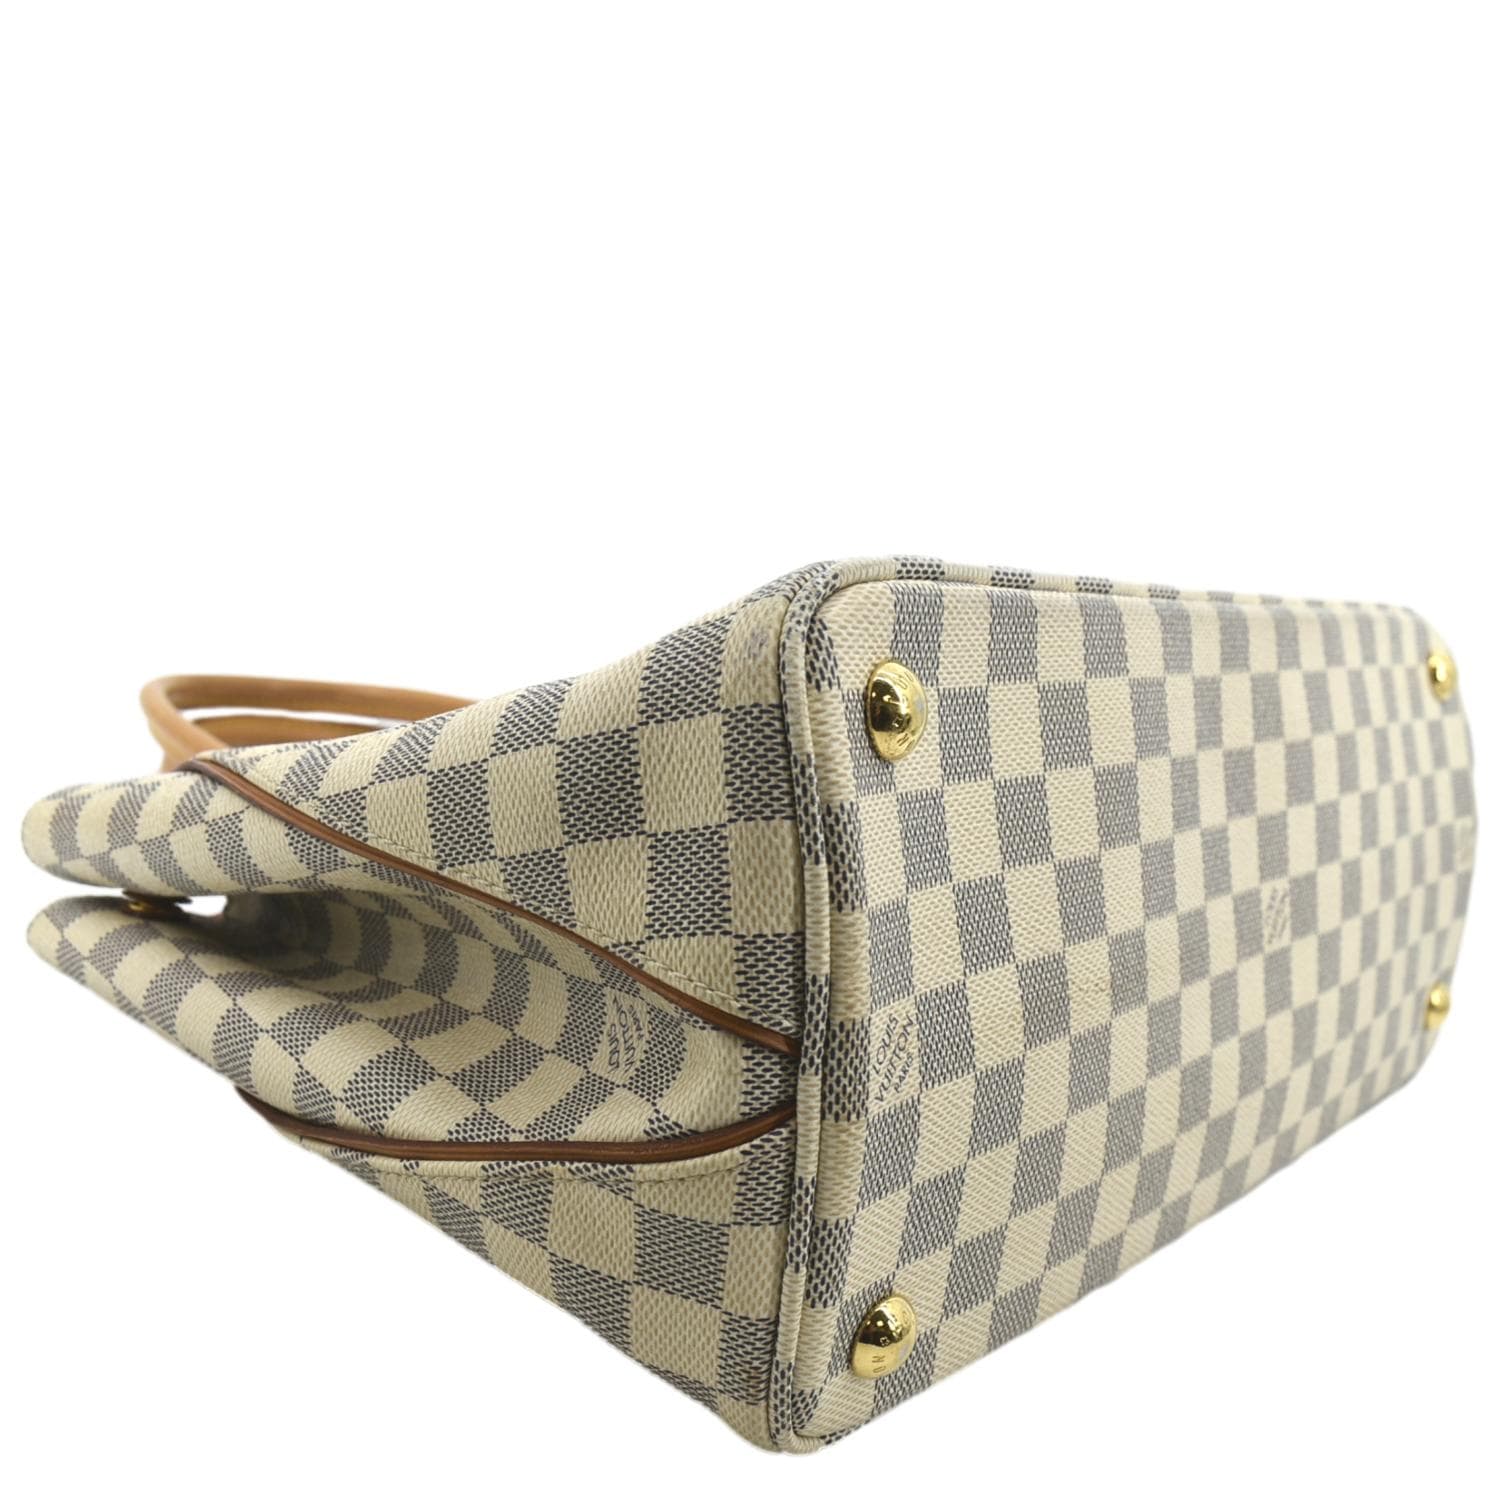 Luxury Cheaper - Auth Louis Vuitton Calvi Damier Azur Shoulder Bag ✓  Overall Condition: Mint/Like New ✓ Style: Shoulder Bag ✓ Outside: No rips,  No tears, Minor scratches ✓ Inside: No rips